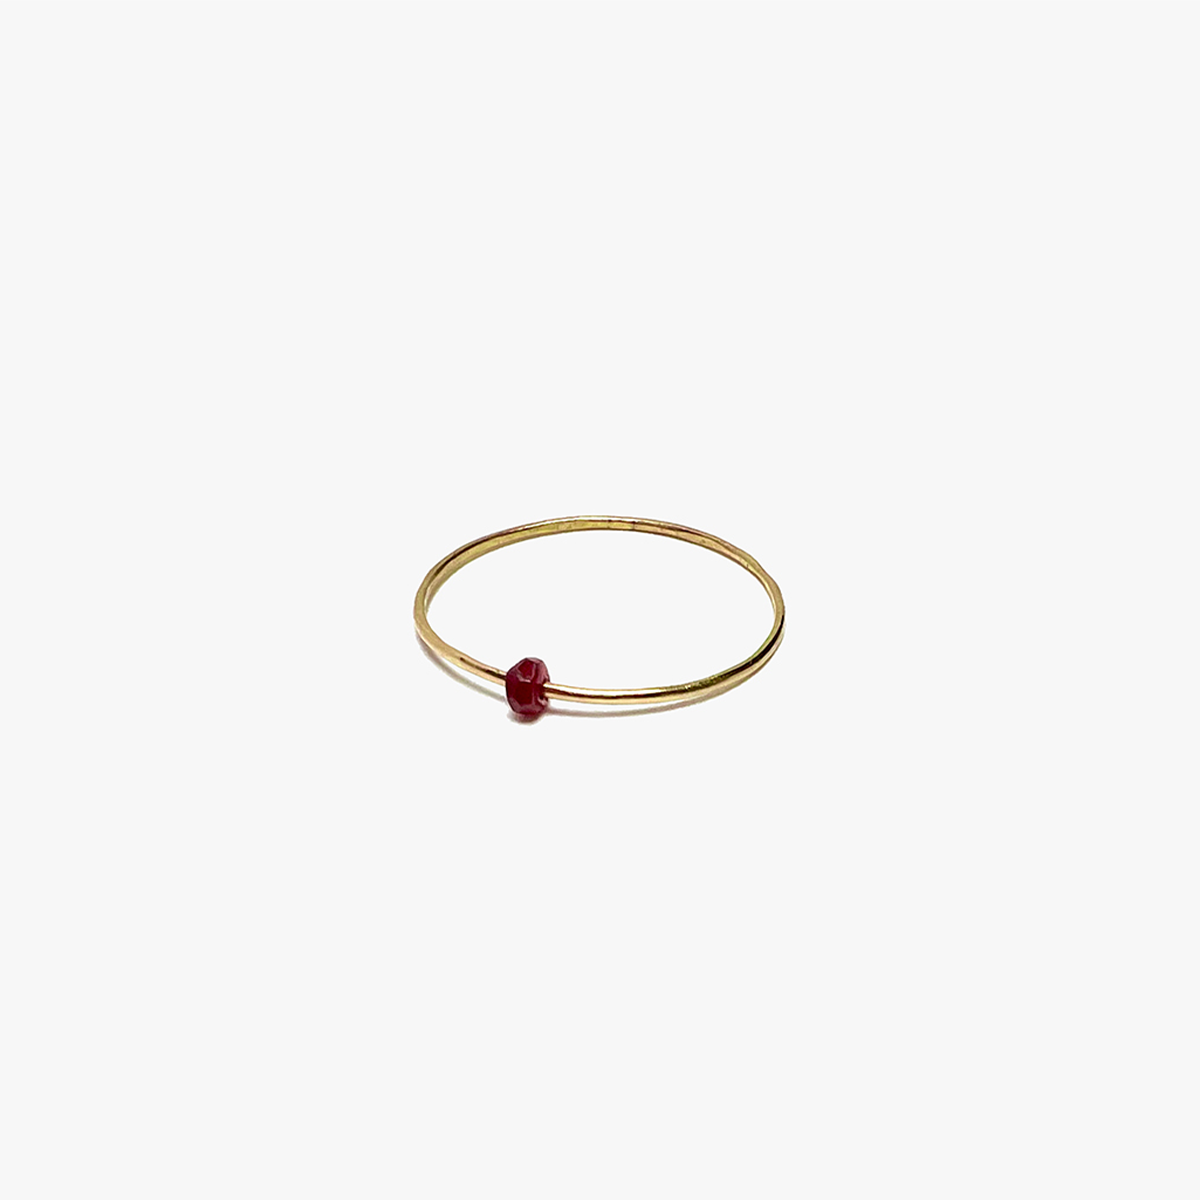 this delicate 18k gold ring features a single ruby.